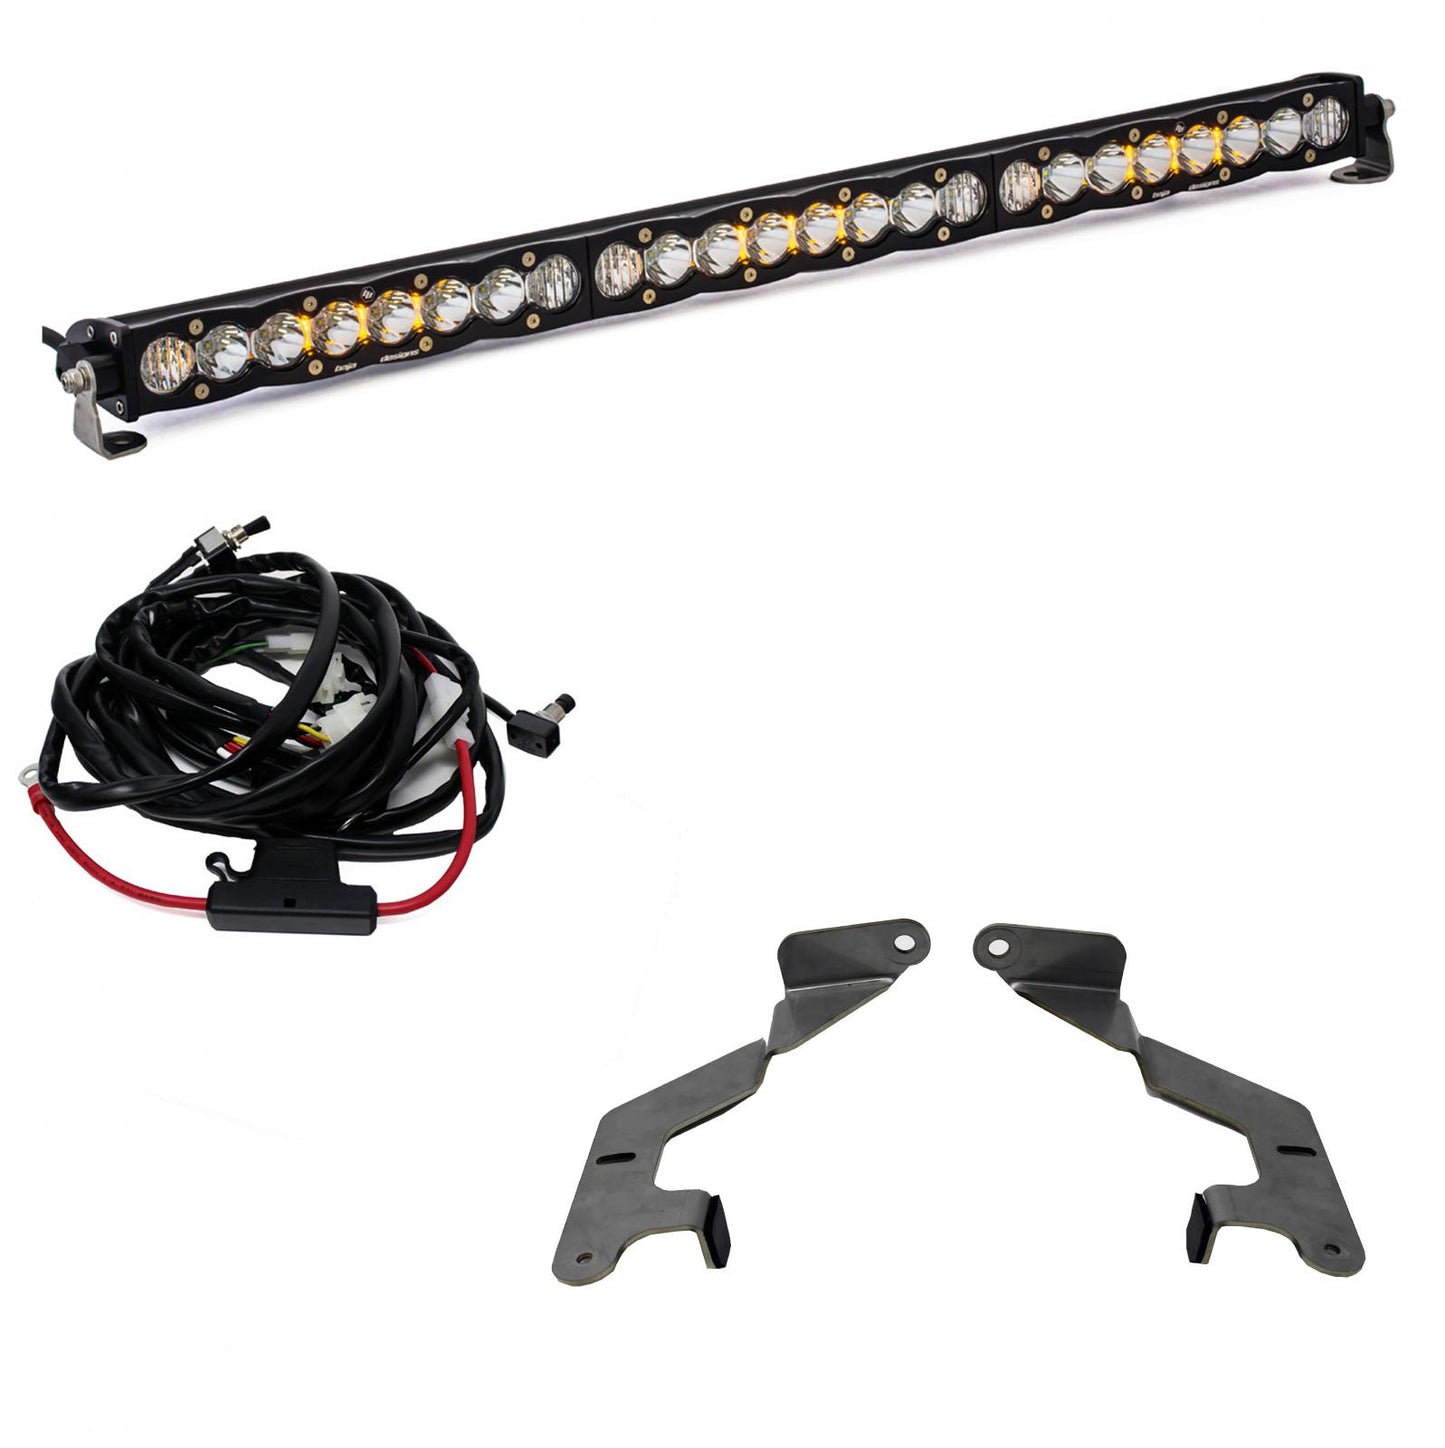 30 Inch Grille LED Light Bar Kit For 14-On Toyota Tundra S8 Driving Combo Baja Designs